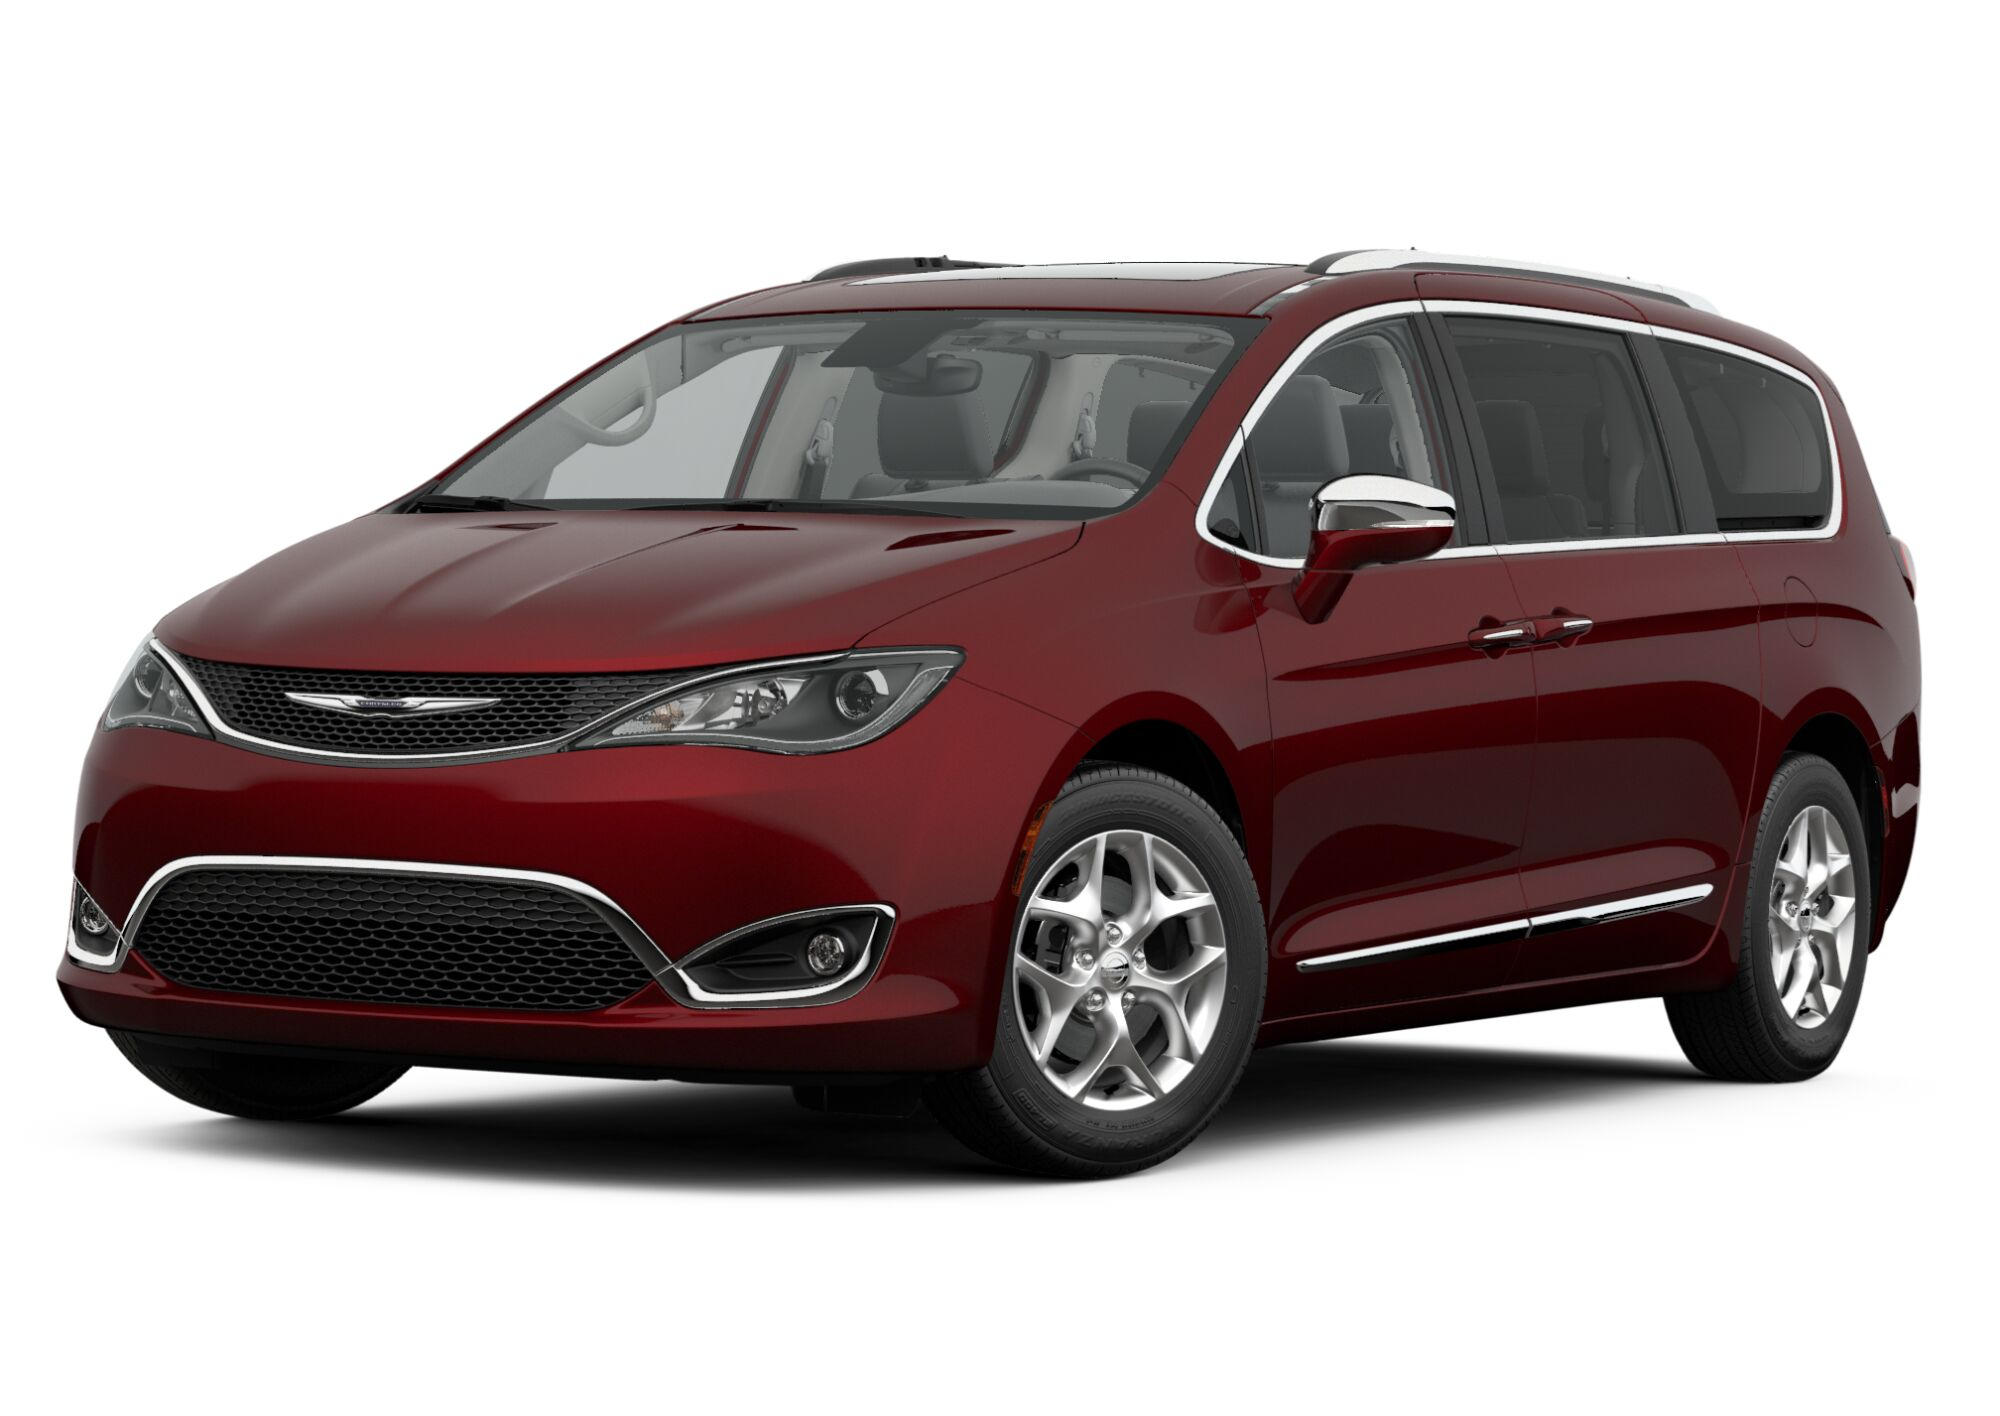 2019 Chrysler Pacifica L Full Specs, Features and Price